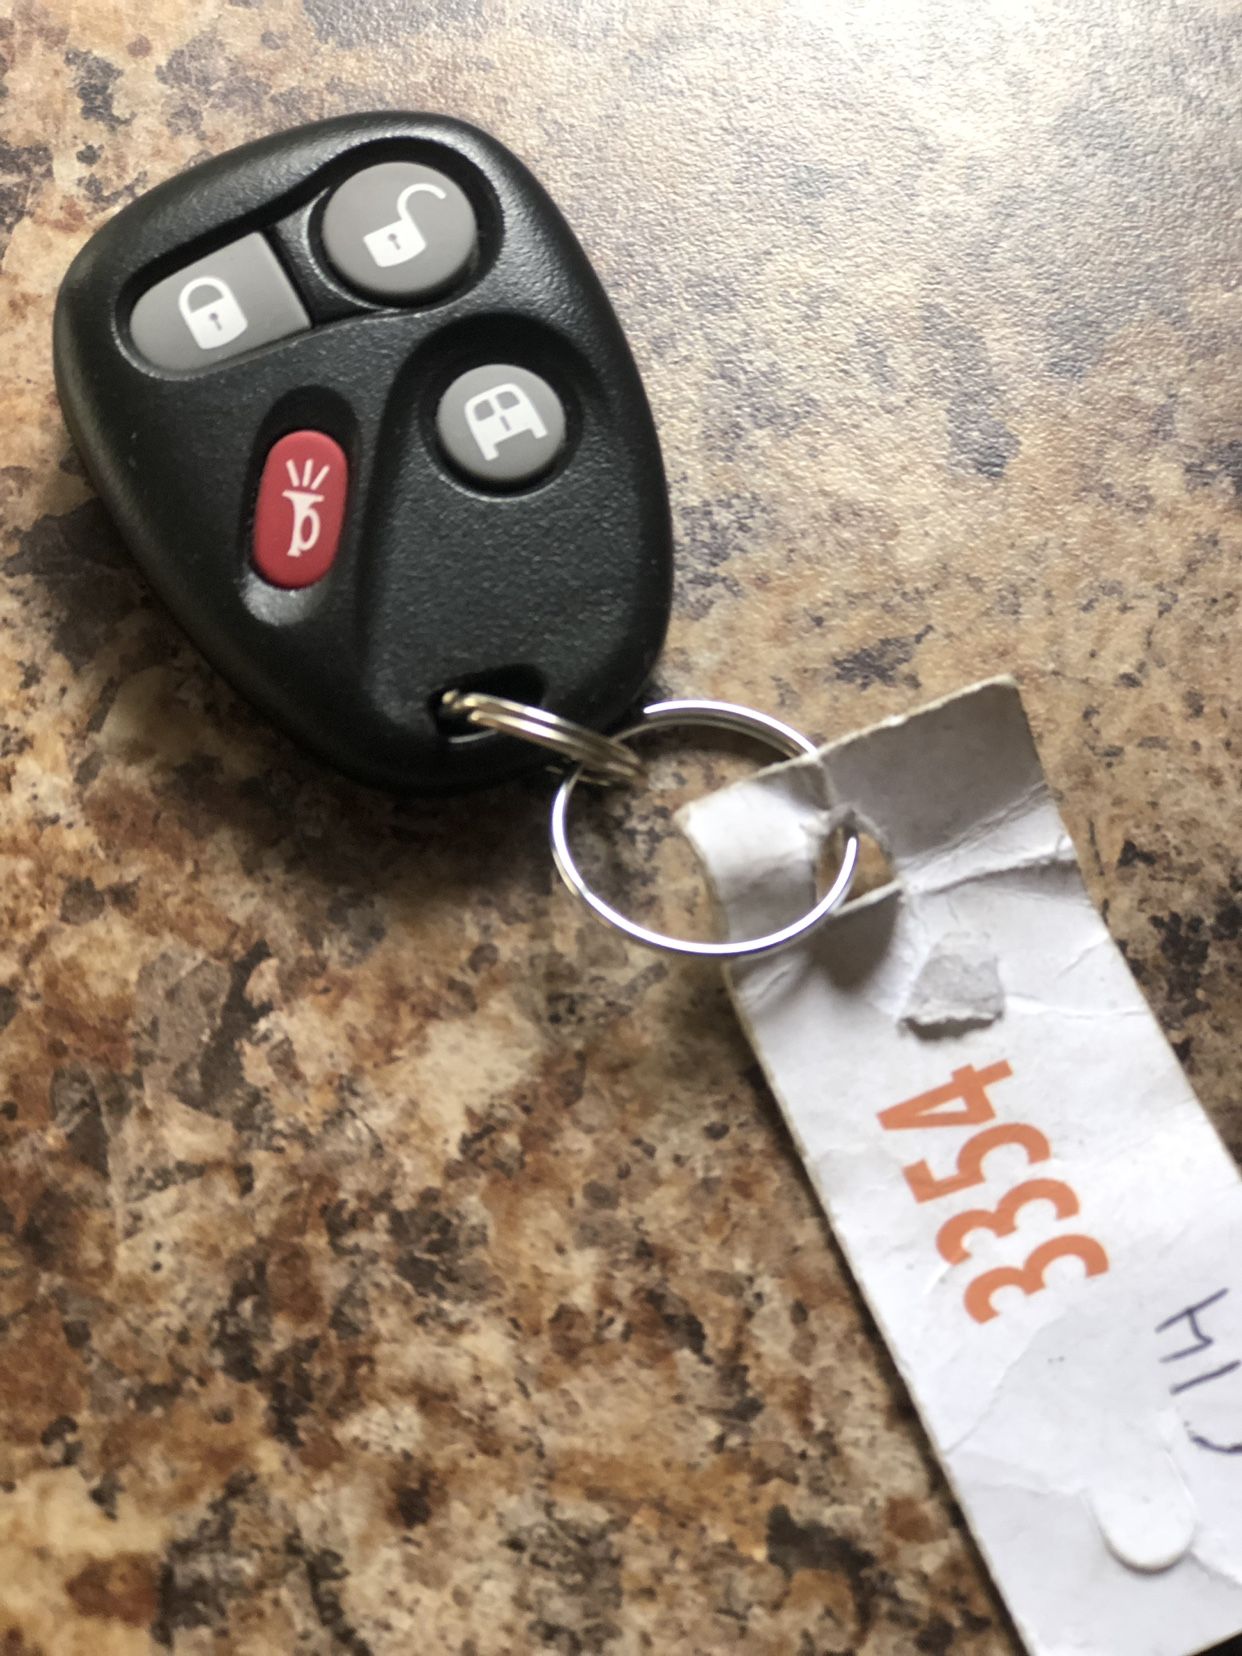 Now this is a brand new Chevrolet key fob off of a 2004 access panel van